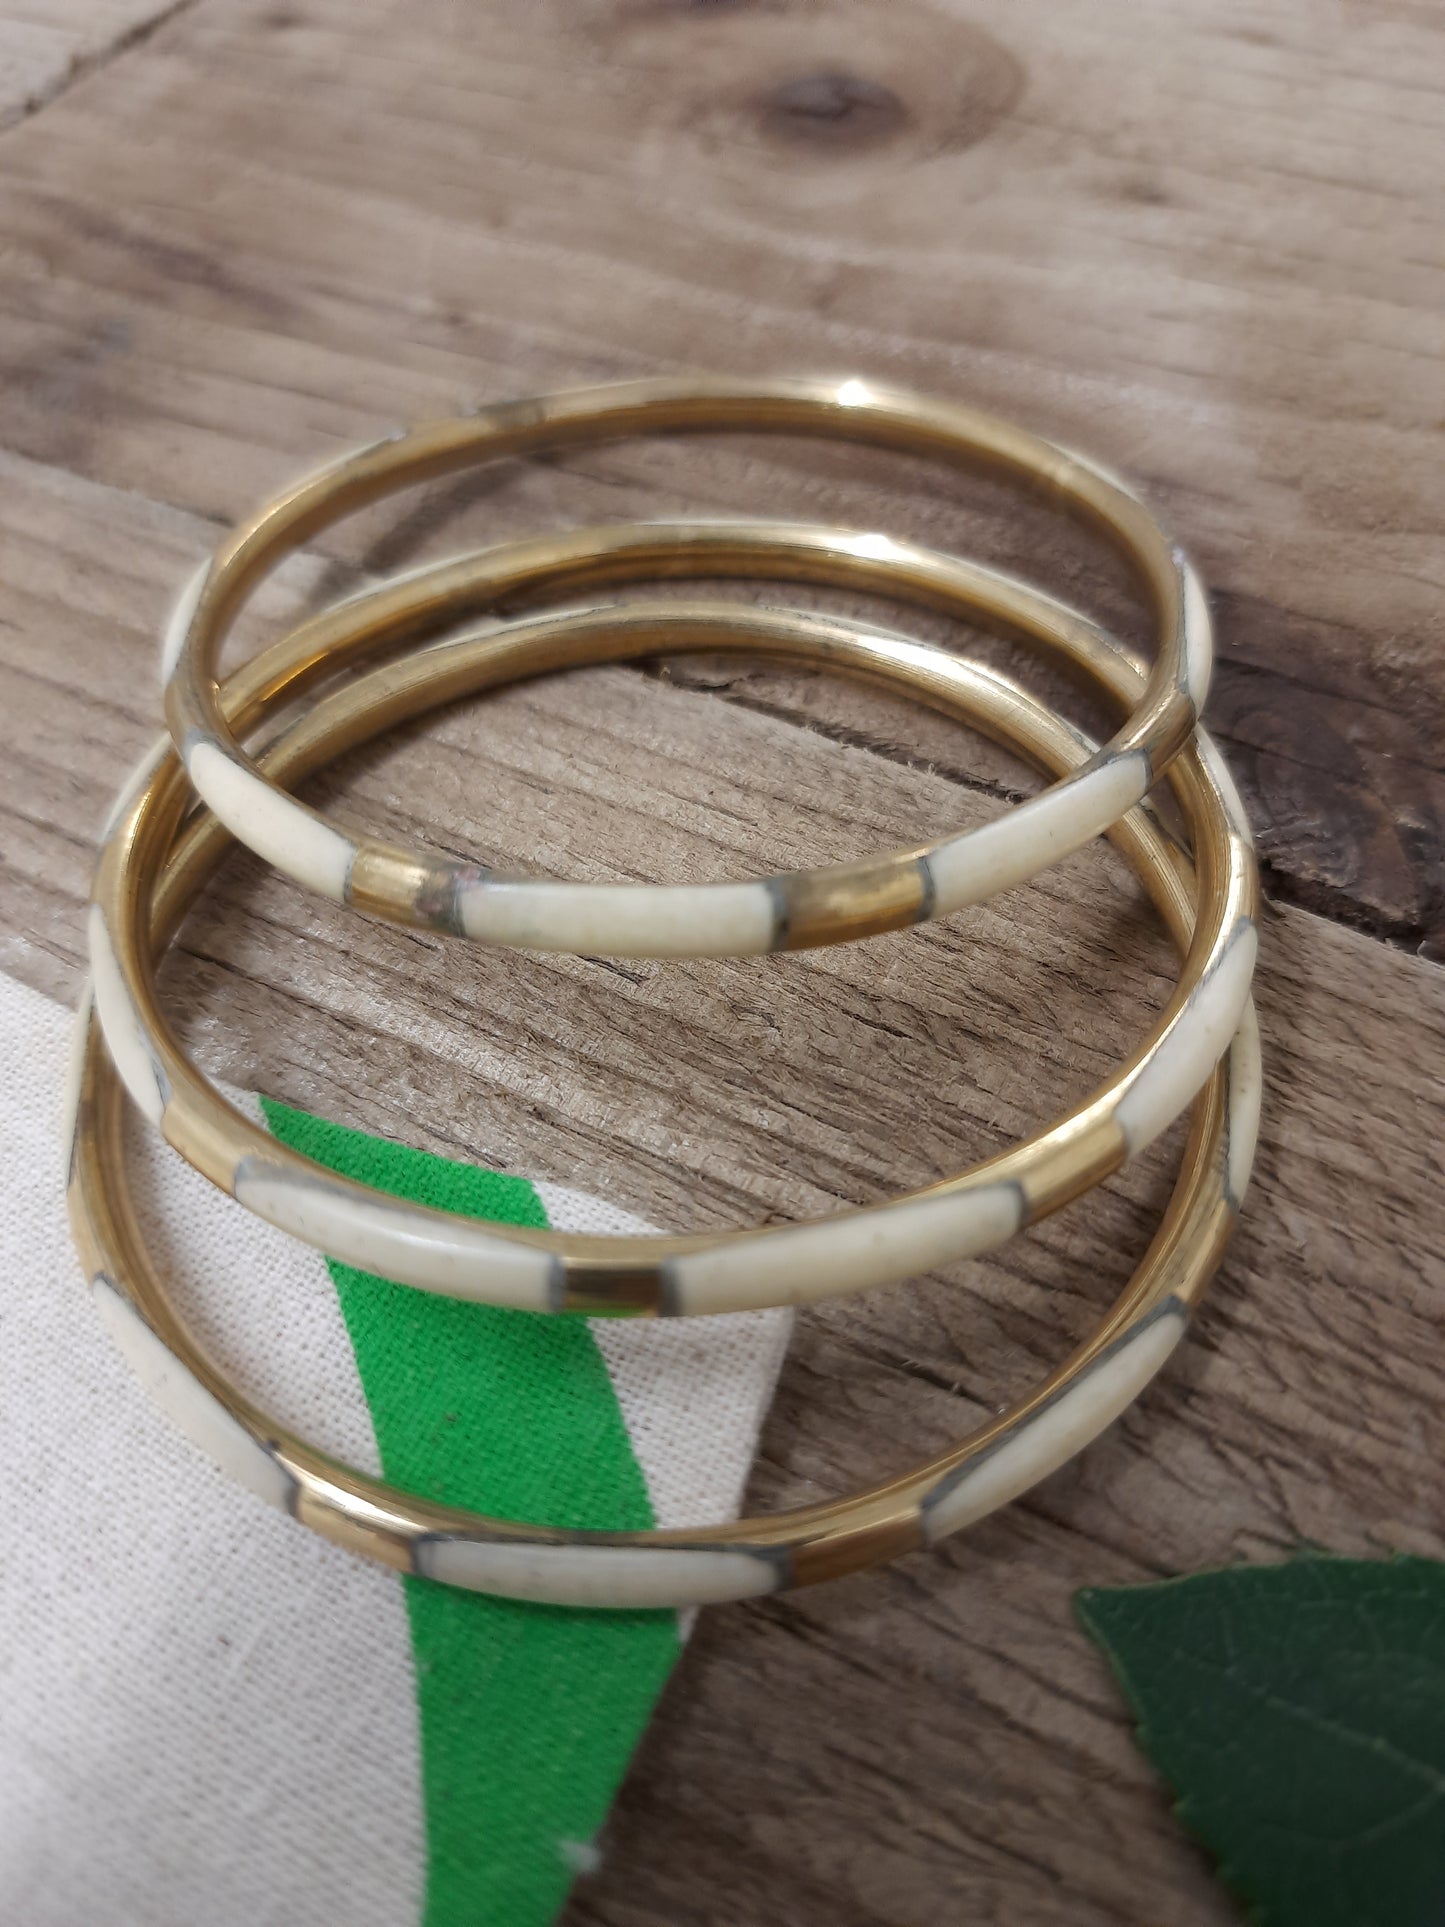 Bangles | UK Ethical Jewellery | Colourful | Jewelry Fair Trade | Eco Friendly Shop | 3 Set